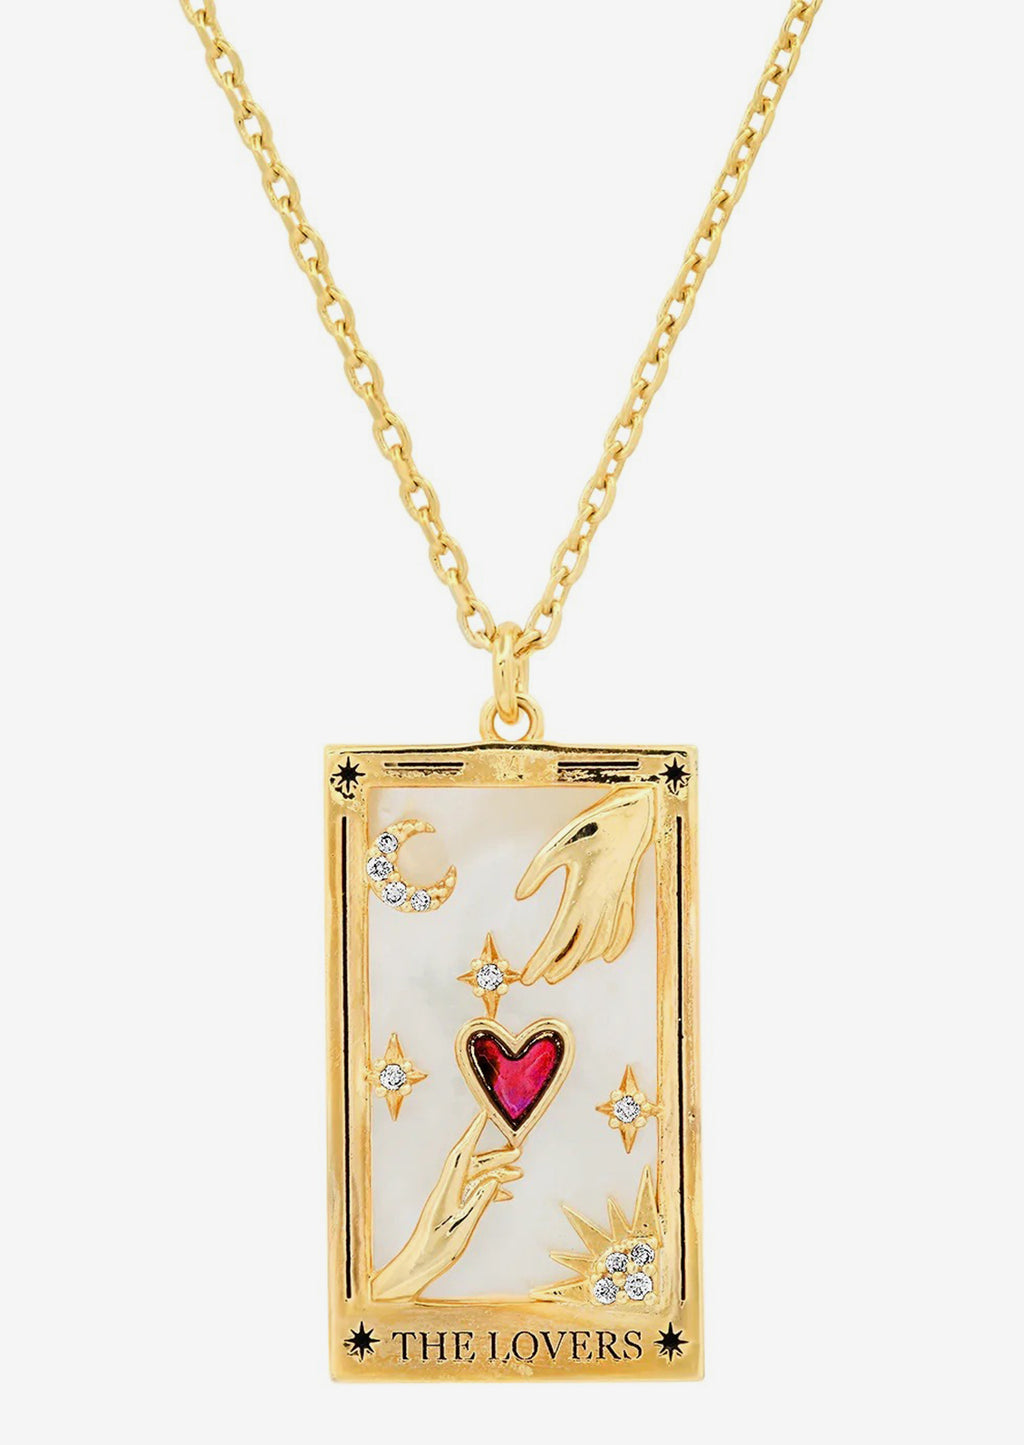 The Lovers: A necklace in style of Lovers tarot card.